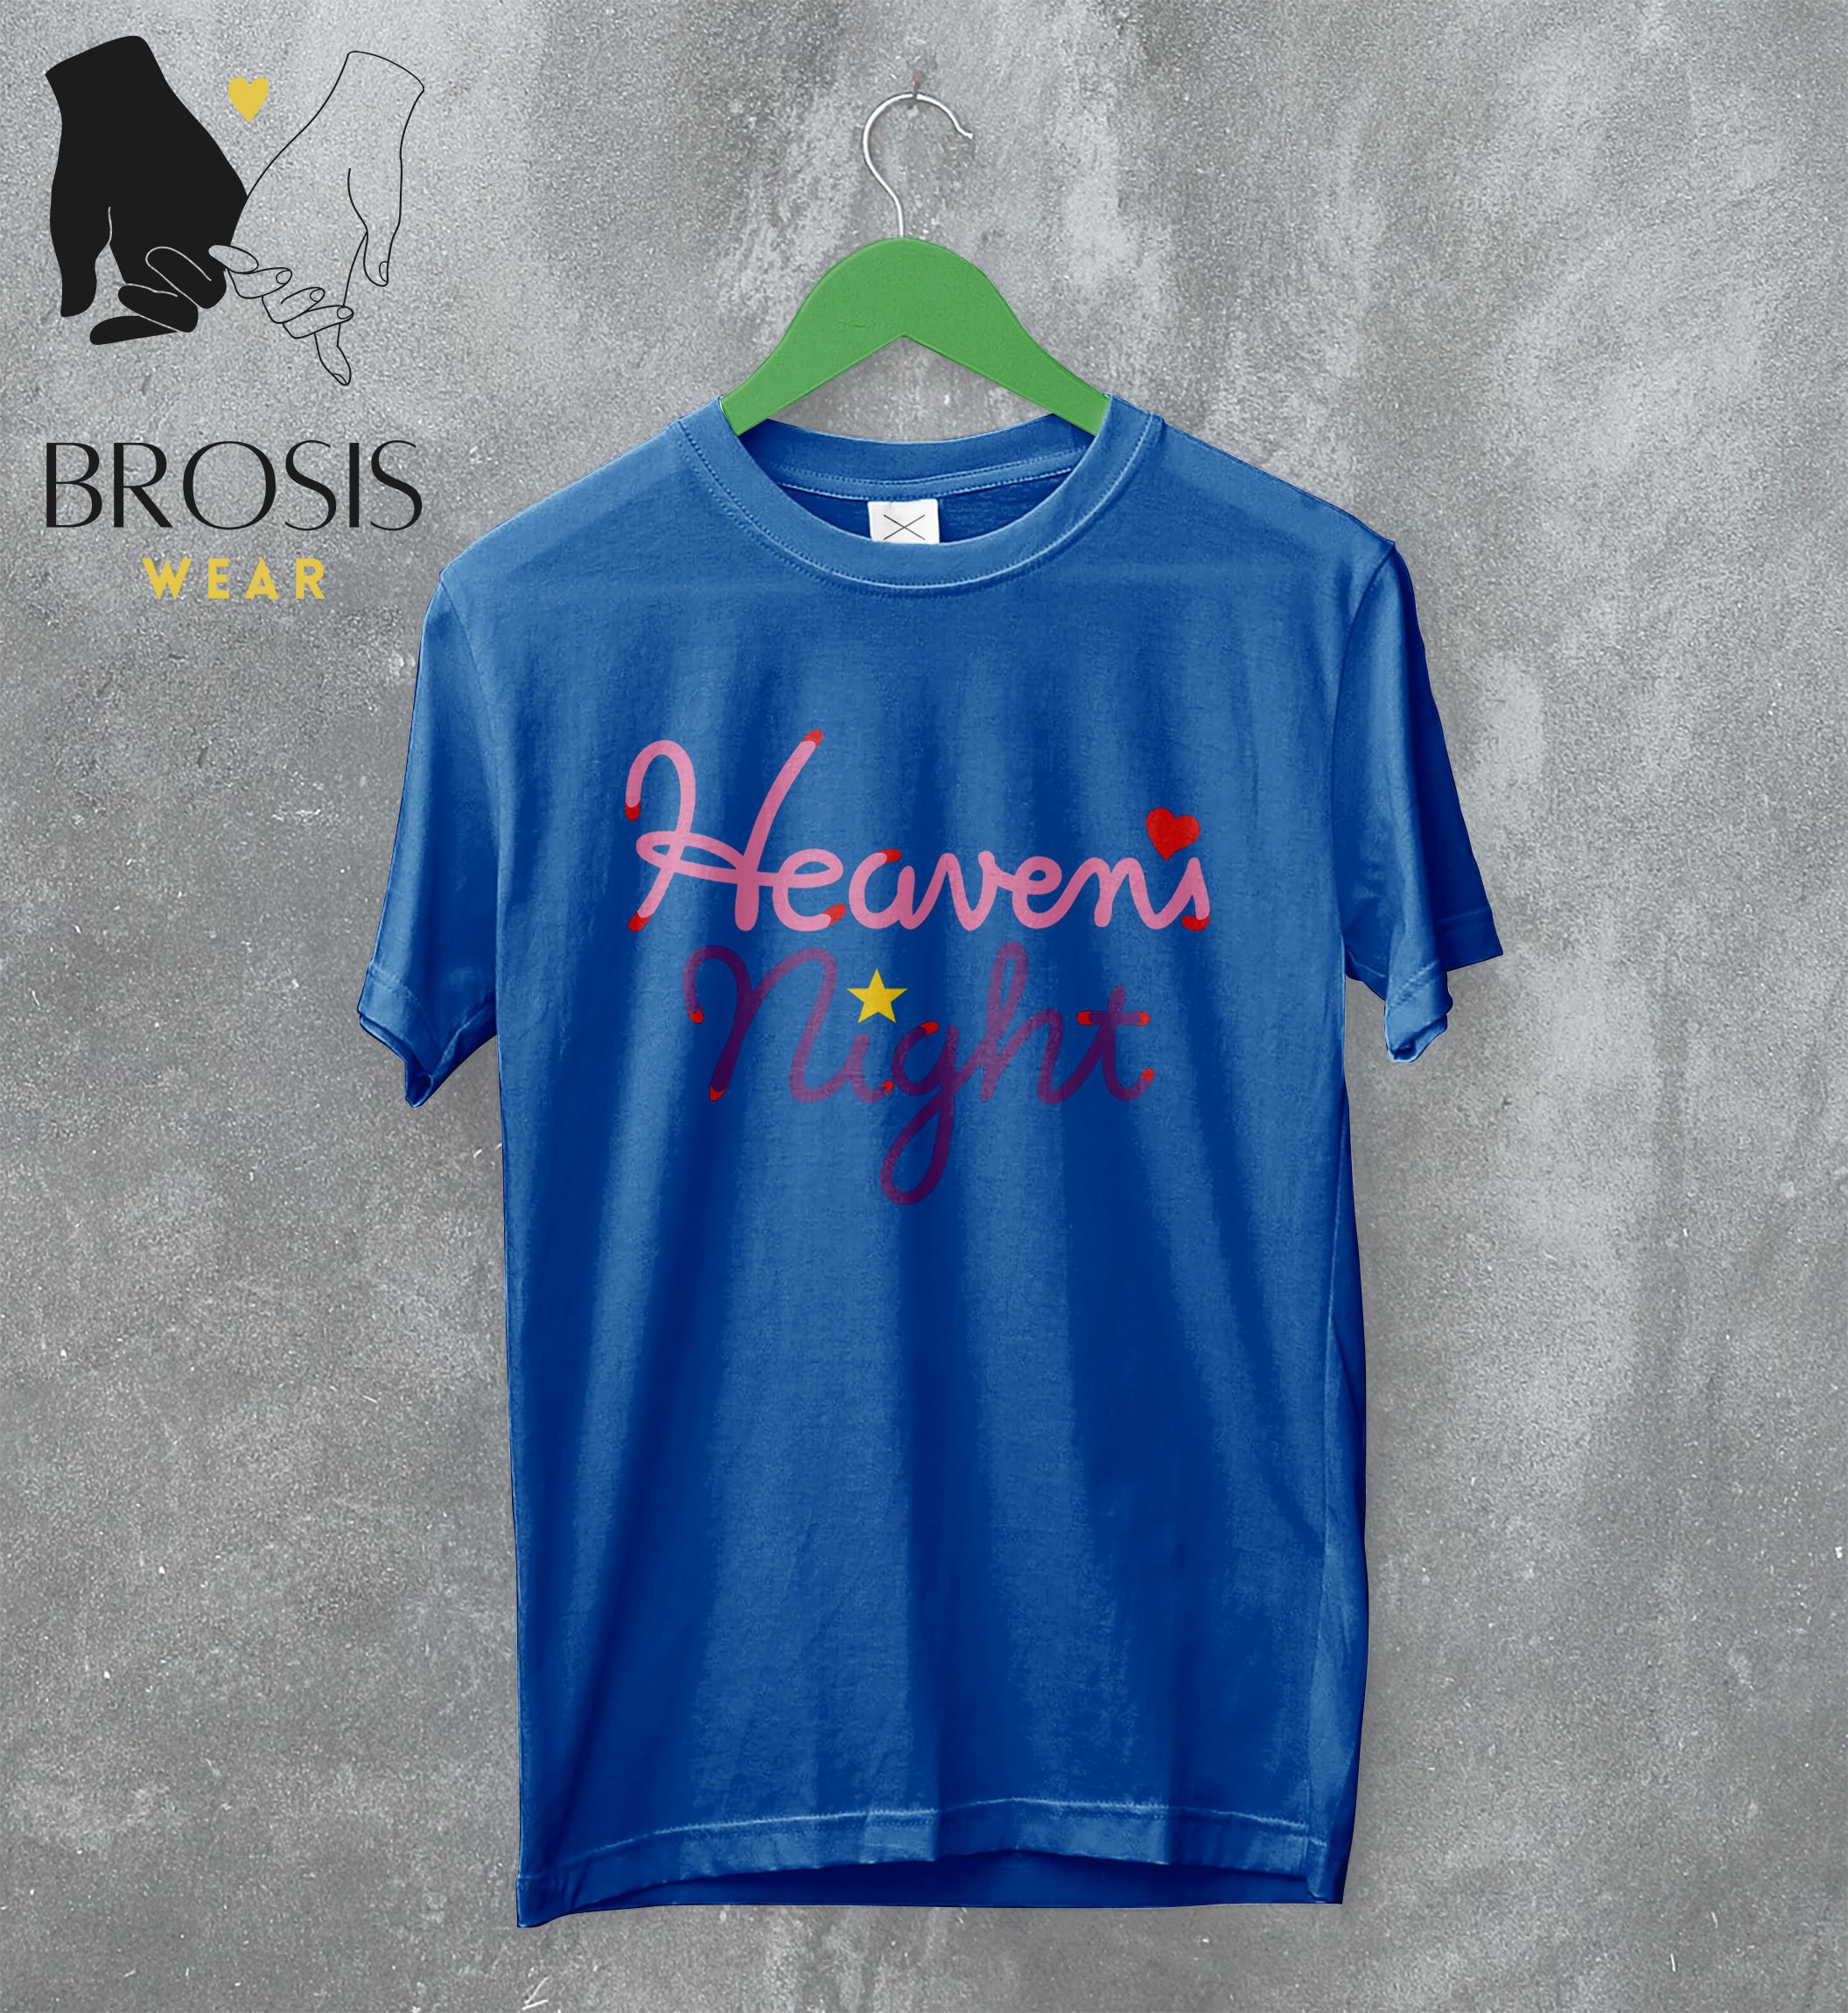 Heavens Night T-shirt Game Inspired 90's Graphic Tee, Video Game